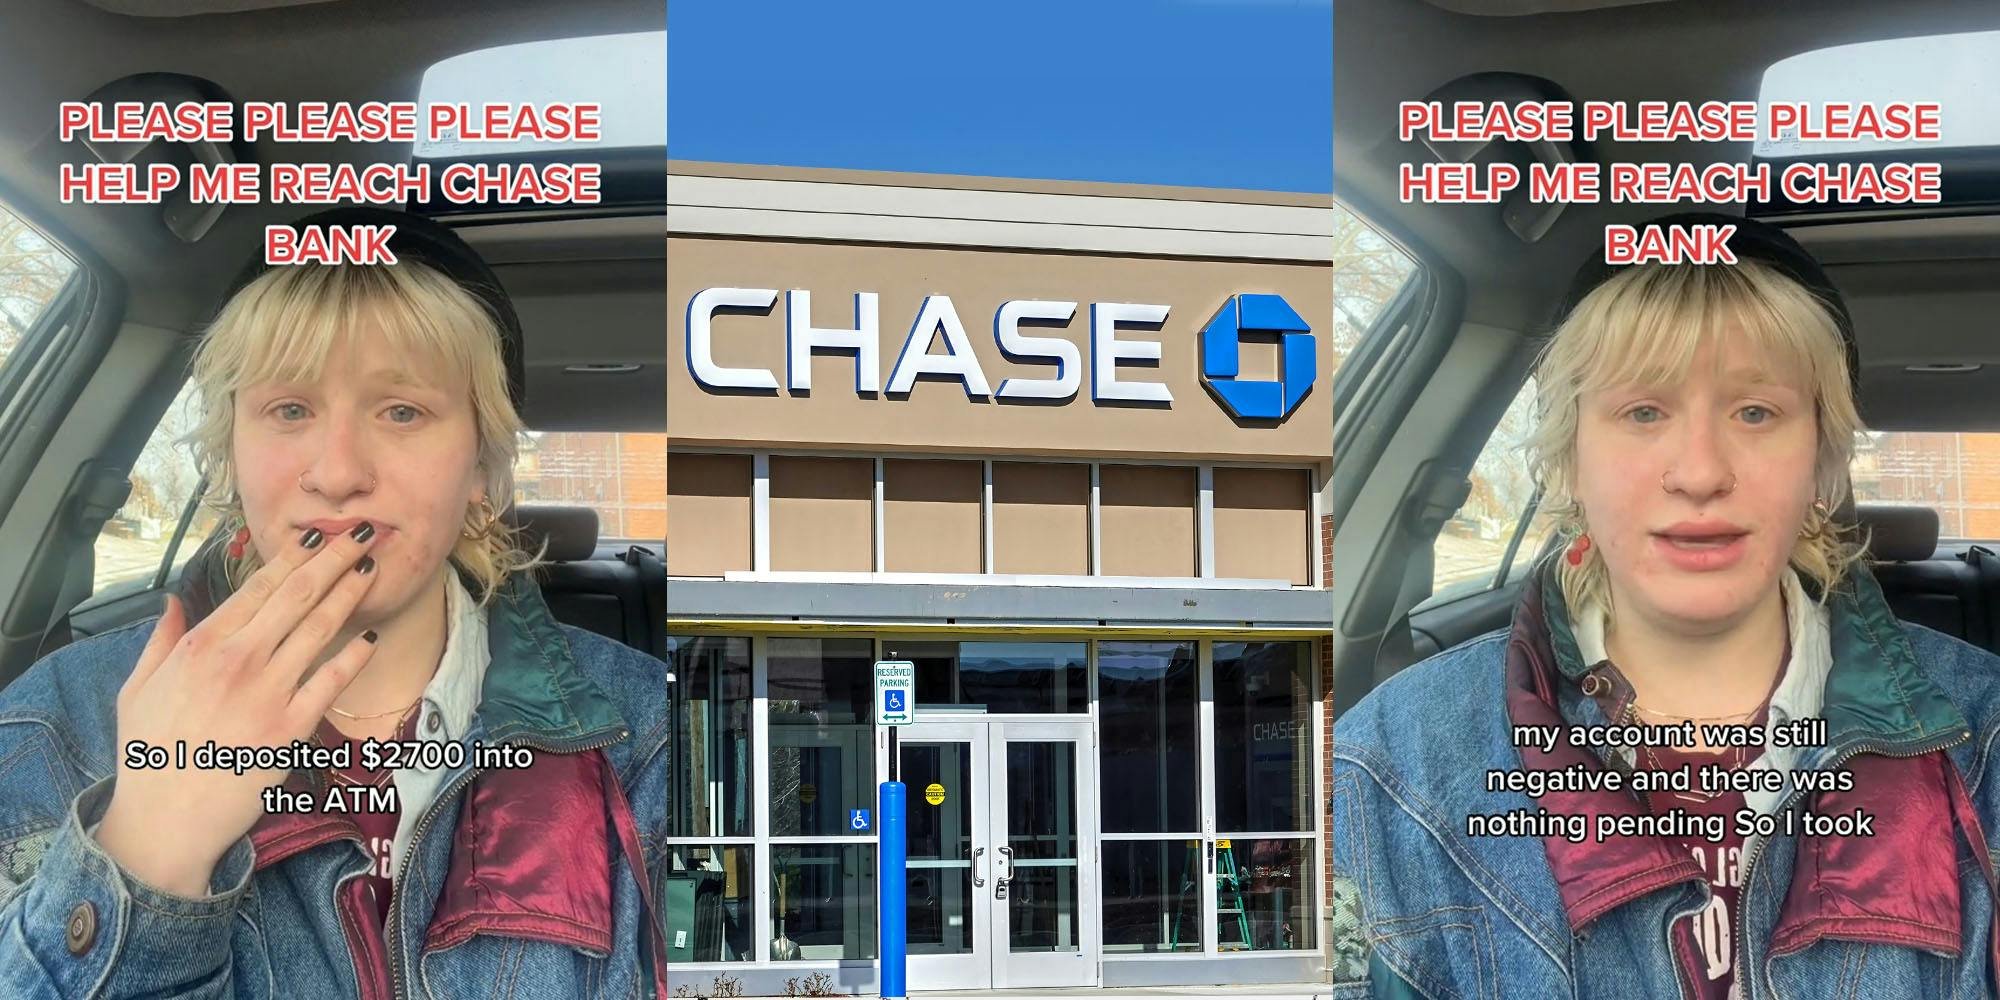 'I have no money now': Woman says Chase ATM ate her $2,700 deposit that never made it into her account